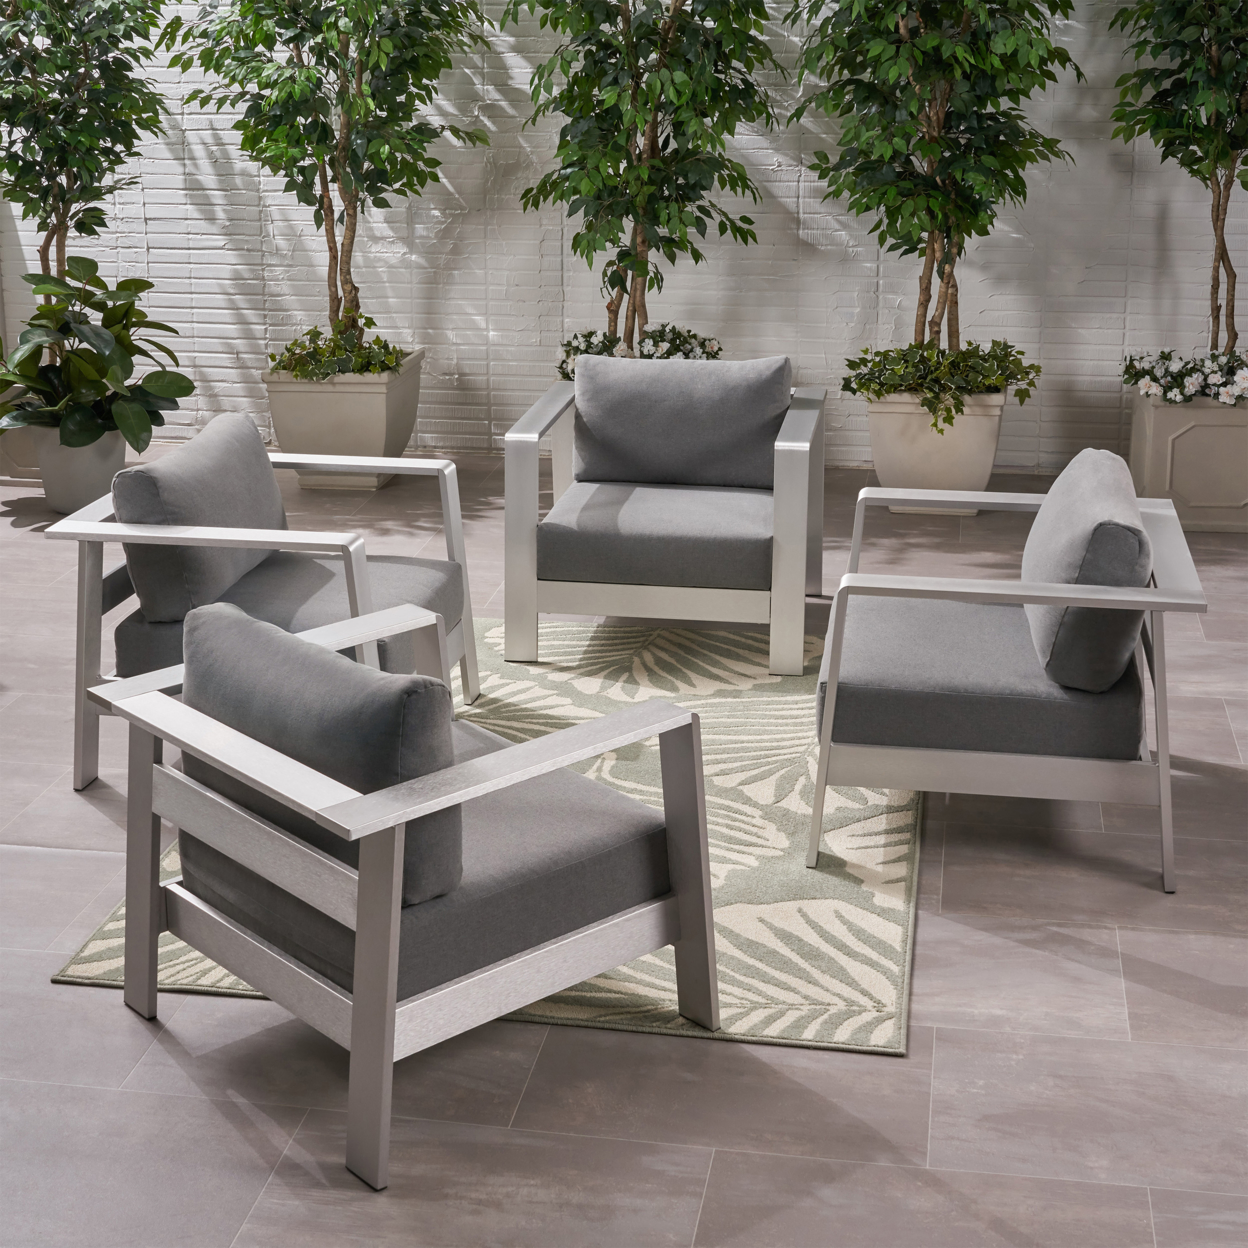 Sindy Outdoor Aluminum Club Chairs With Cushions (Set Of 4) - Silver + Gray